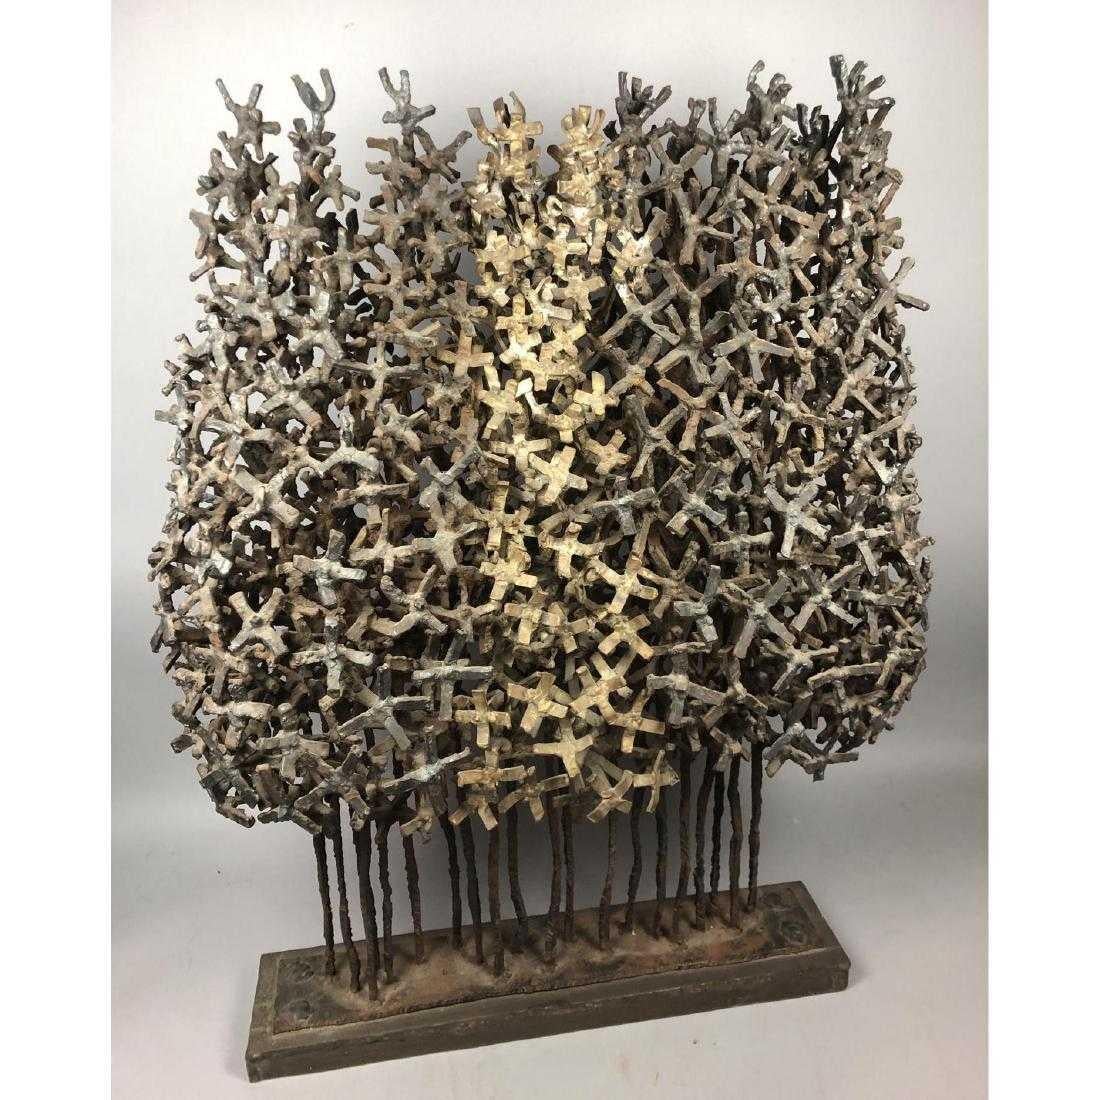 Very rare and unique welded metal grove of trees table sculpture. Iron and brass. Star shaped elements on conical trees. Absolutely one of a kind.